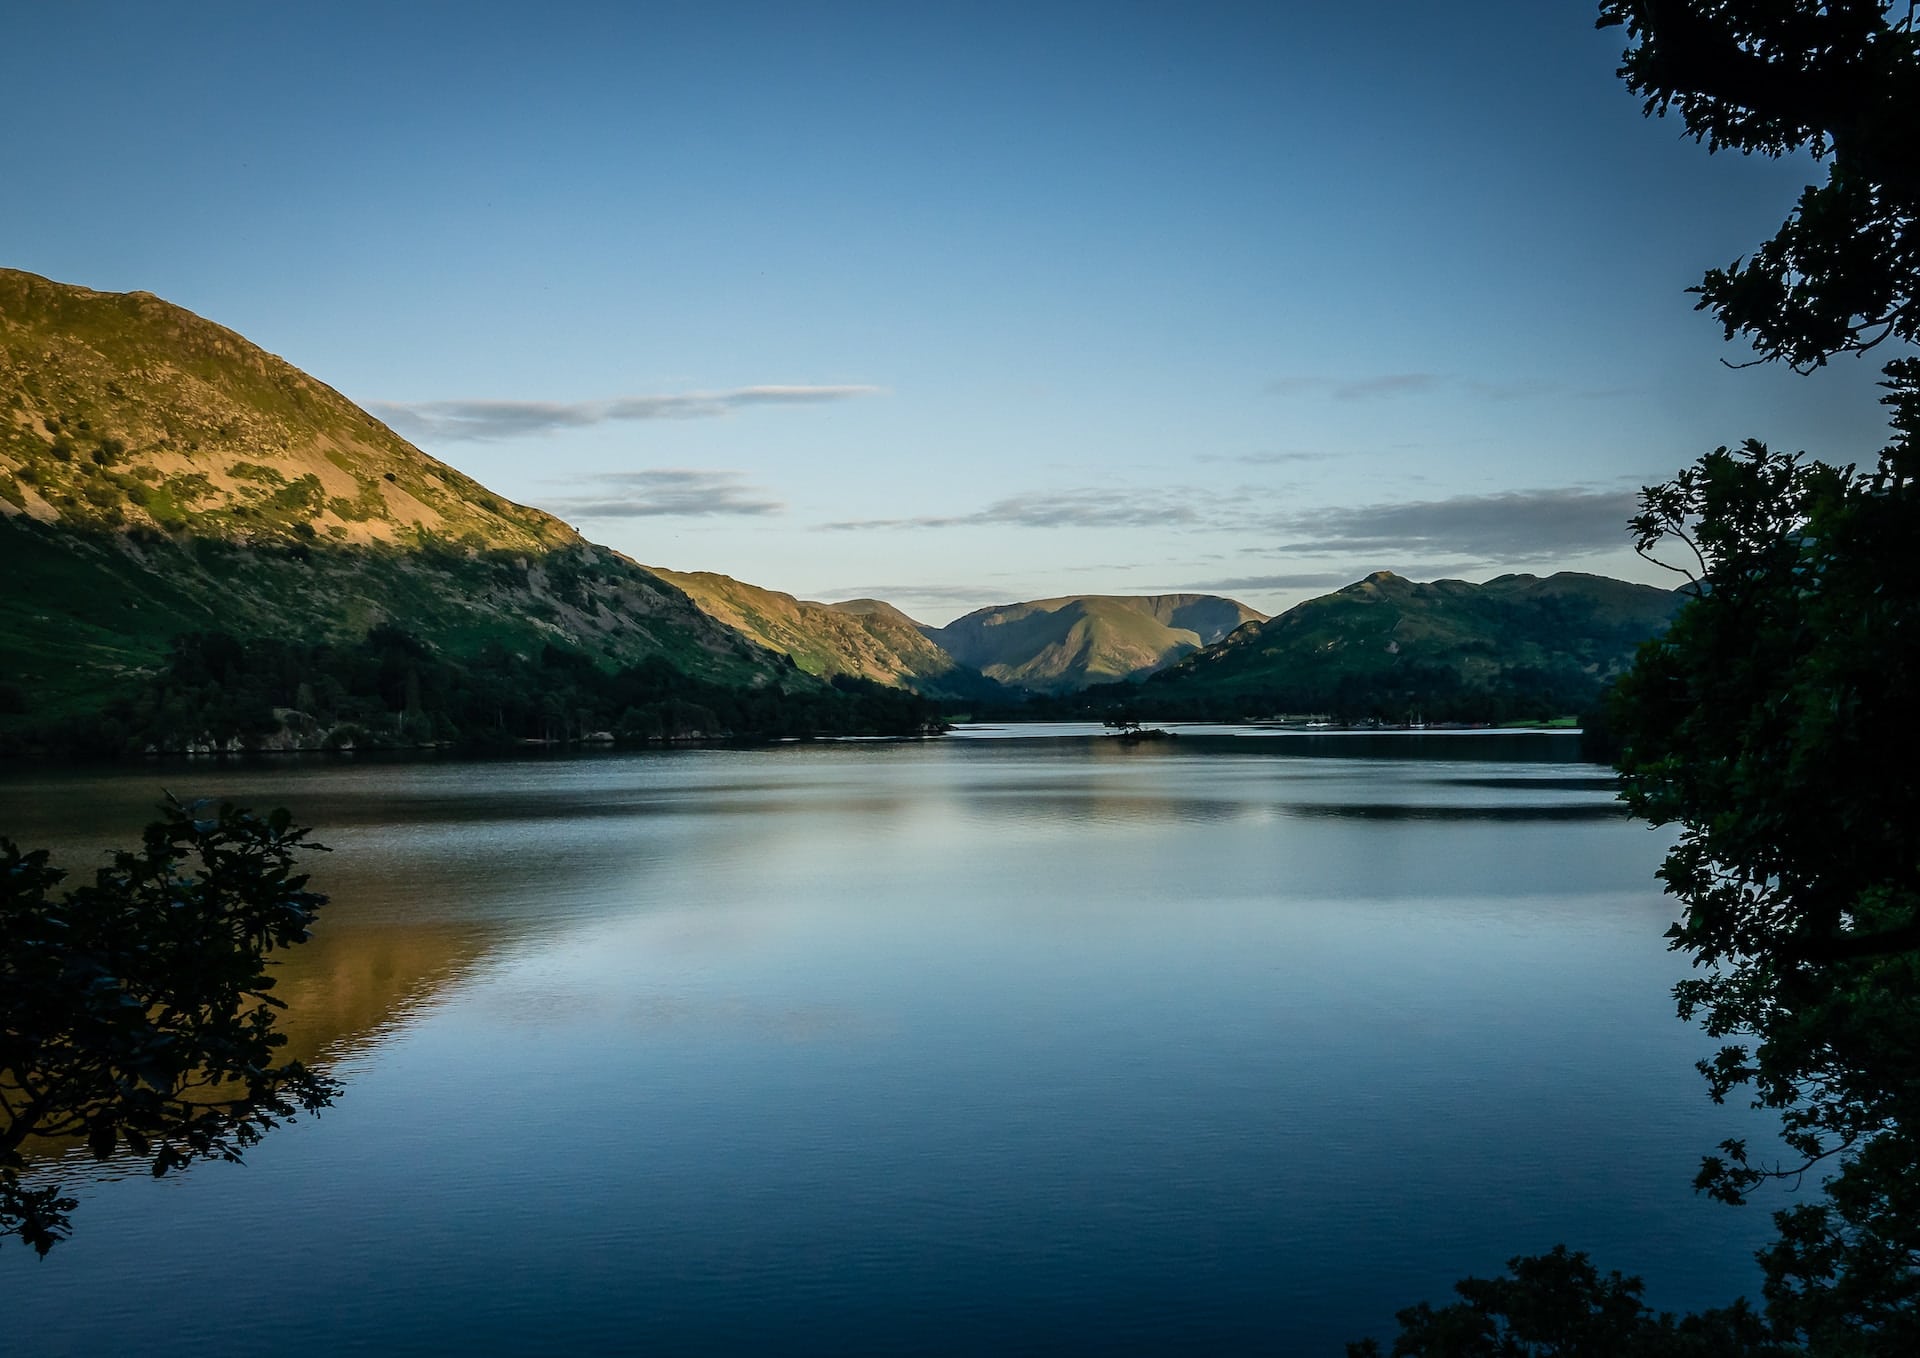 Elopement packages in the Lake District with an all-inclusive option